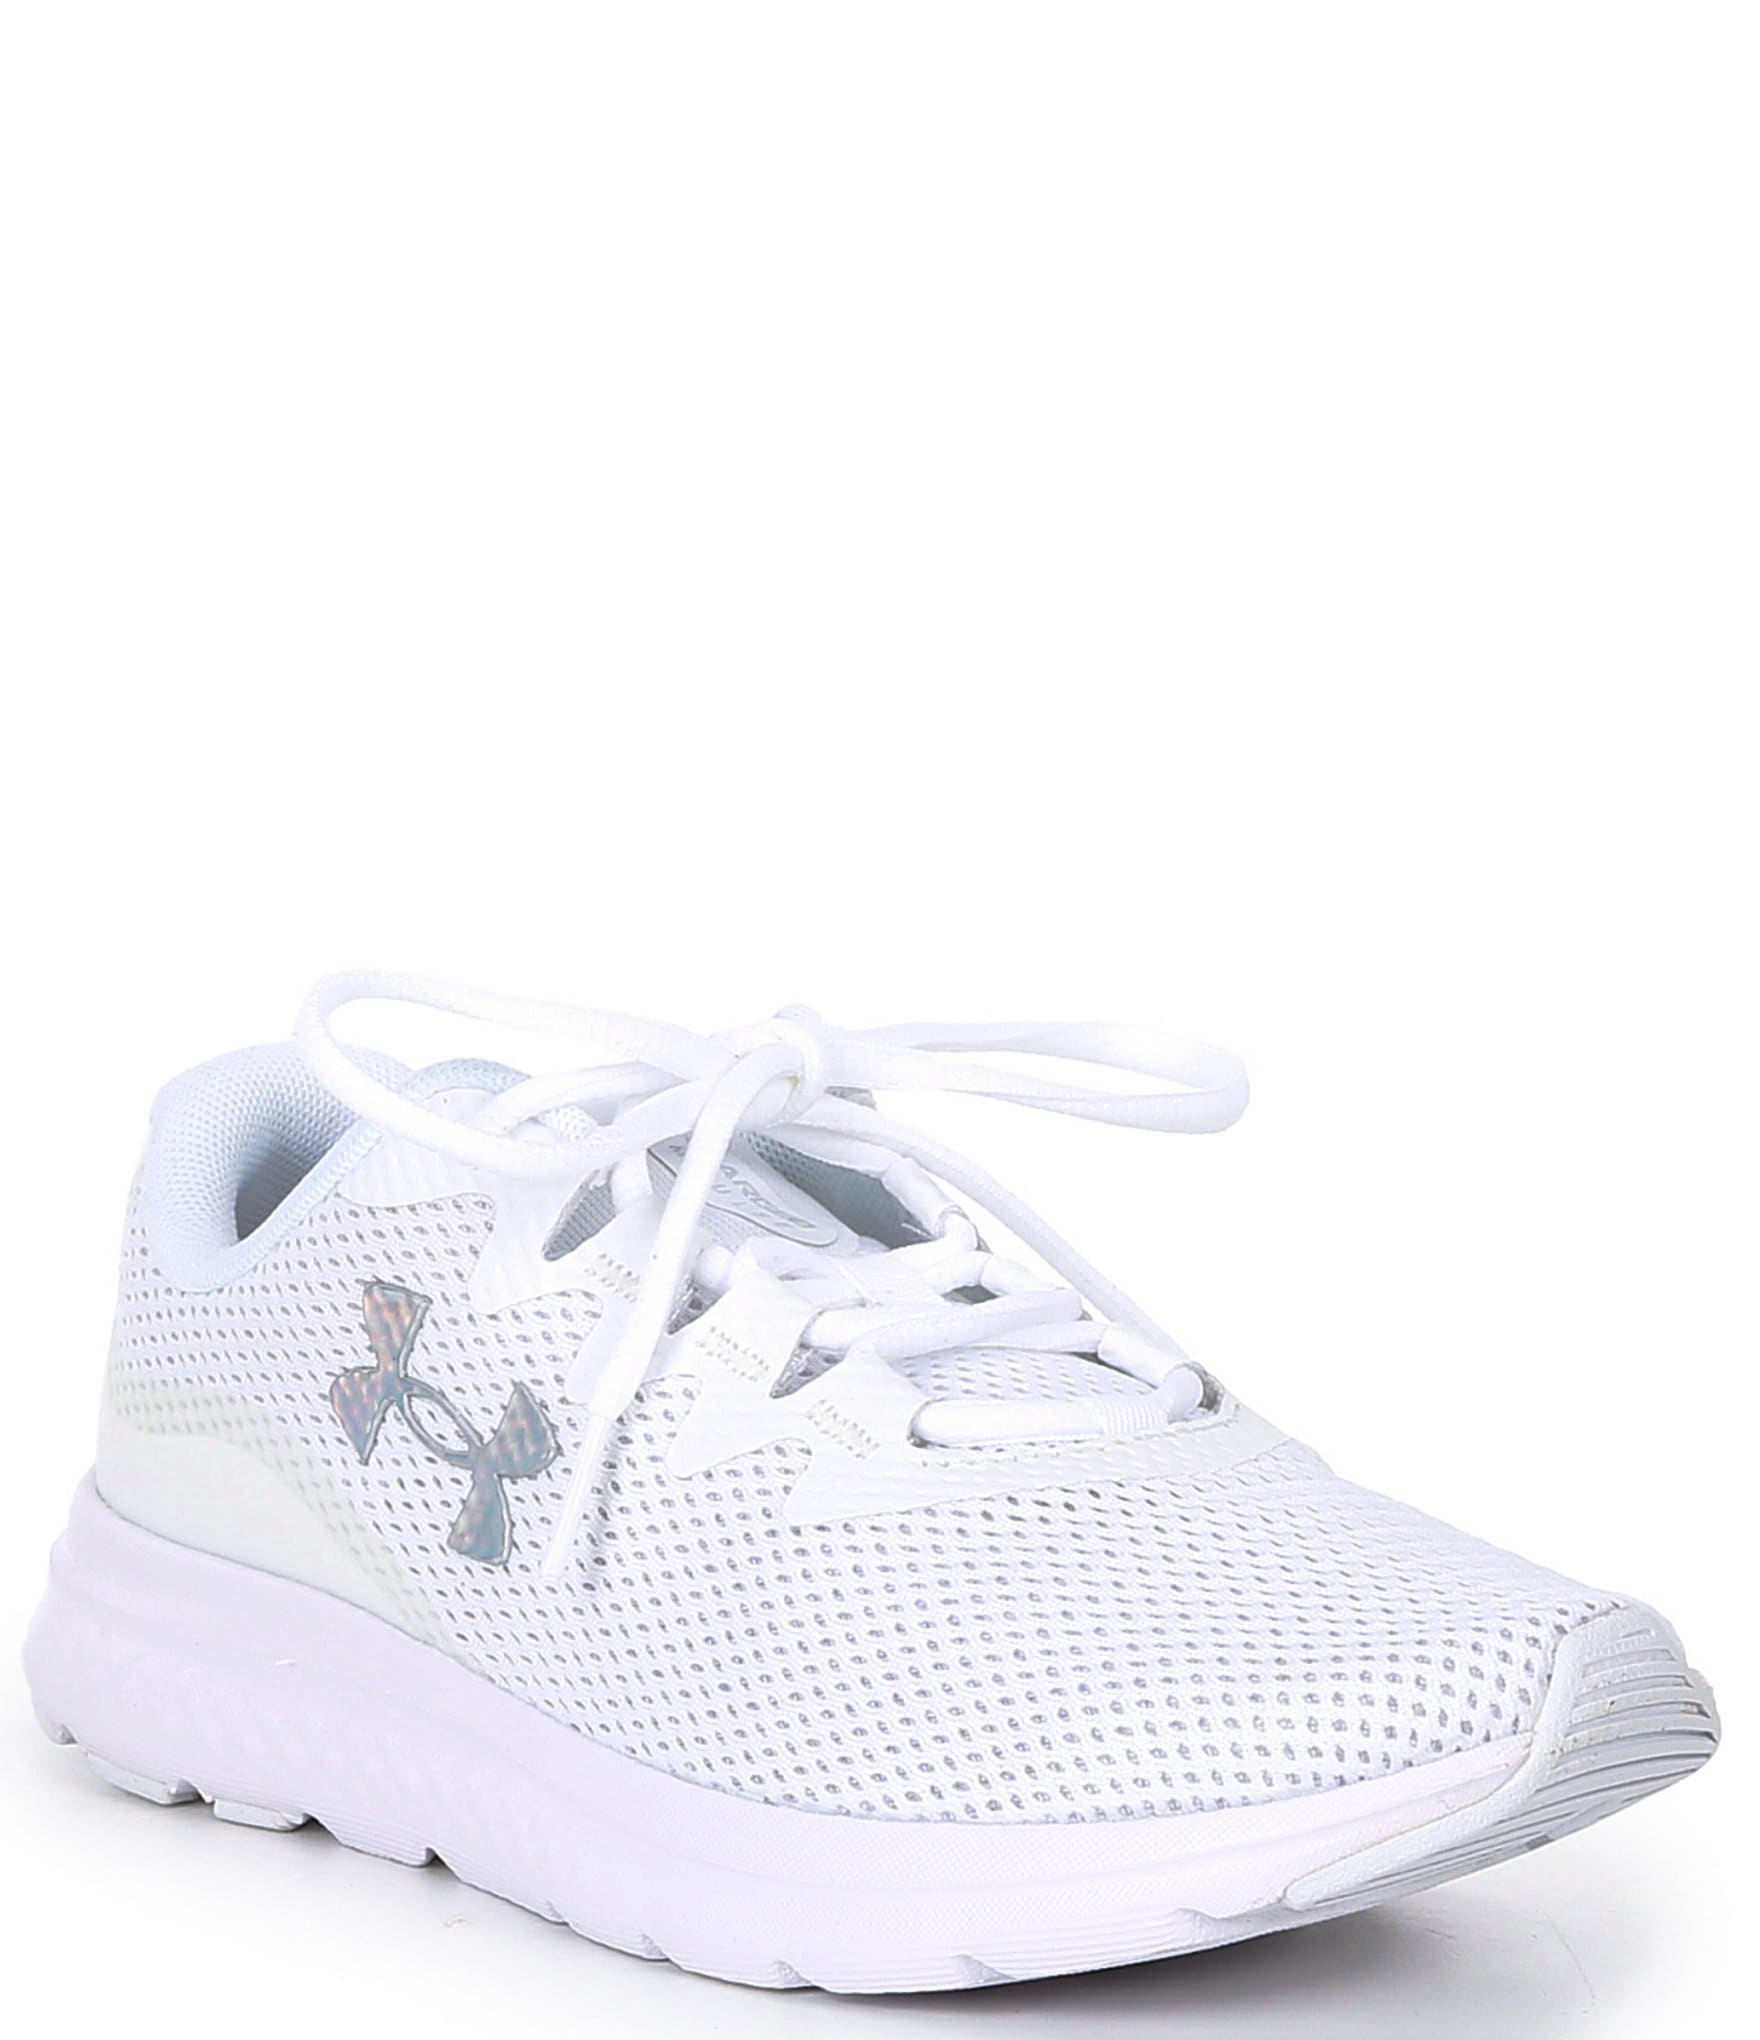 Under Armour Women's Charged Impulse 3 Iridescent Running Shoes